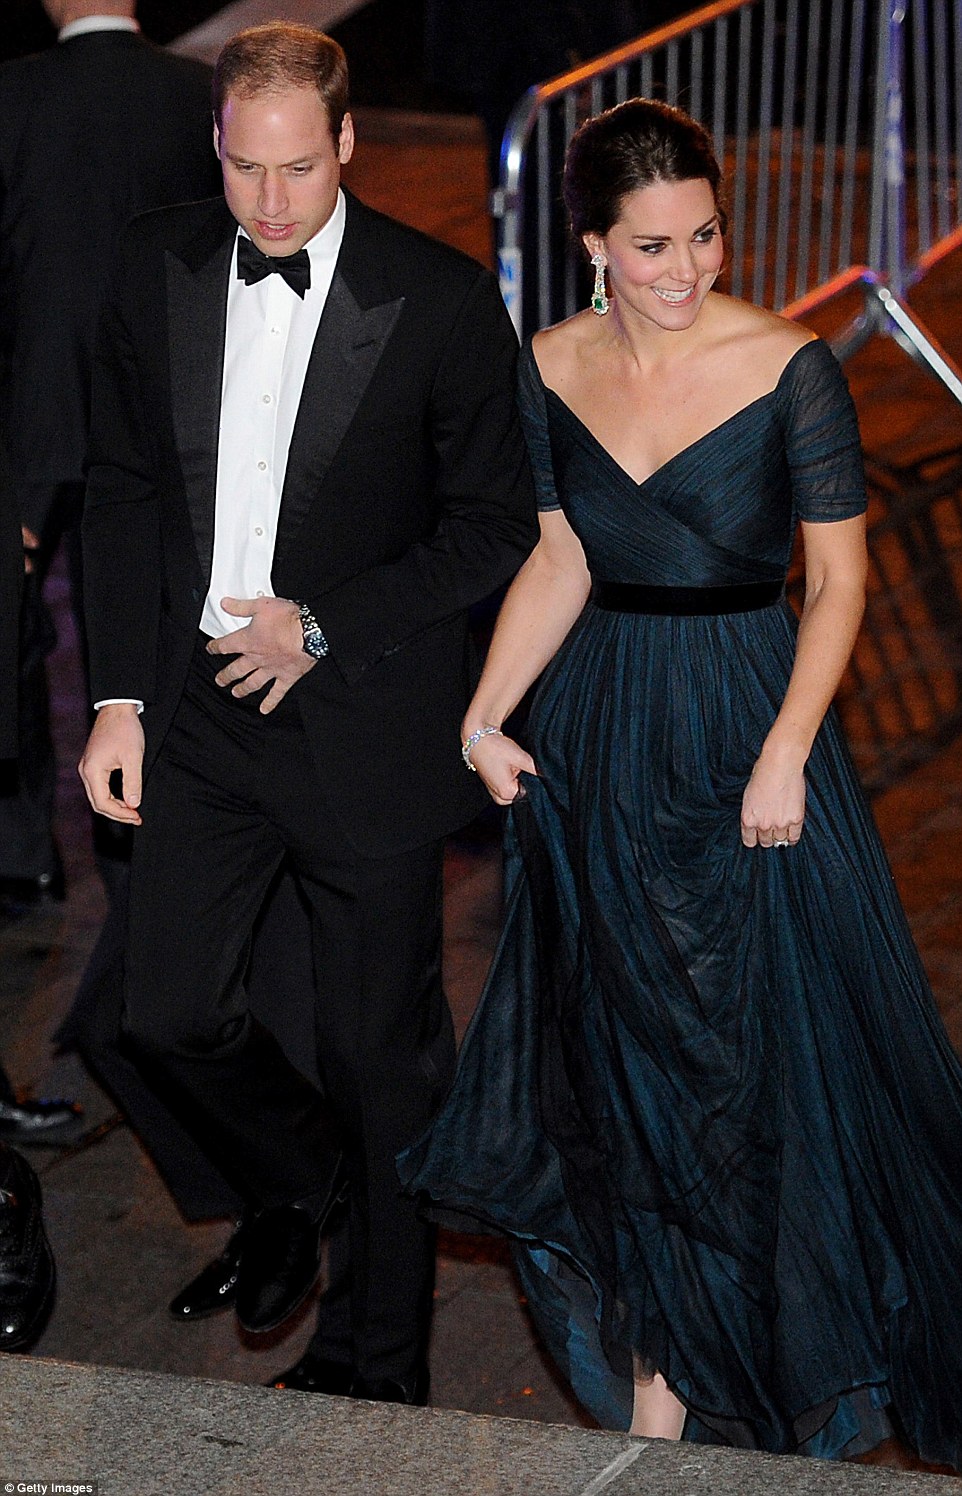 Dazzling: The Duke and Duchess are pictured arriving at New York's Metropolitan Museum of Art tonight to raise money for their alma mater: St Andrews University in Scotland. Kate is seen donning a midnight blue Jenny Packham evening gown and designer earrings